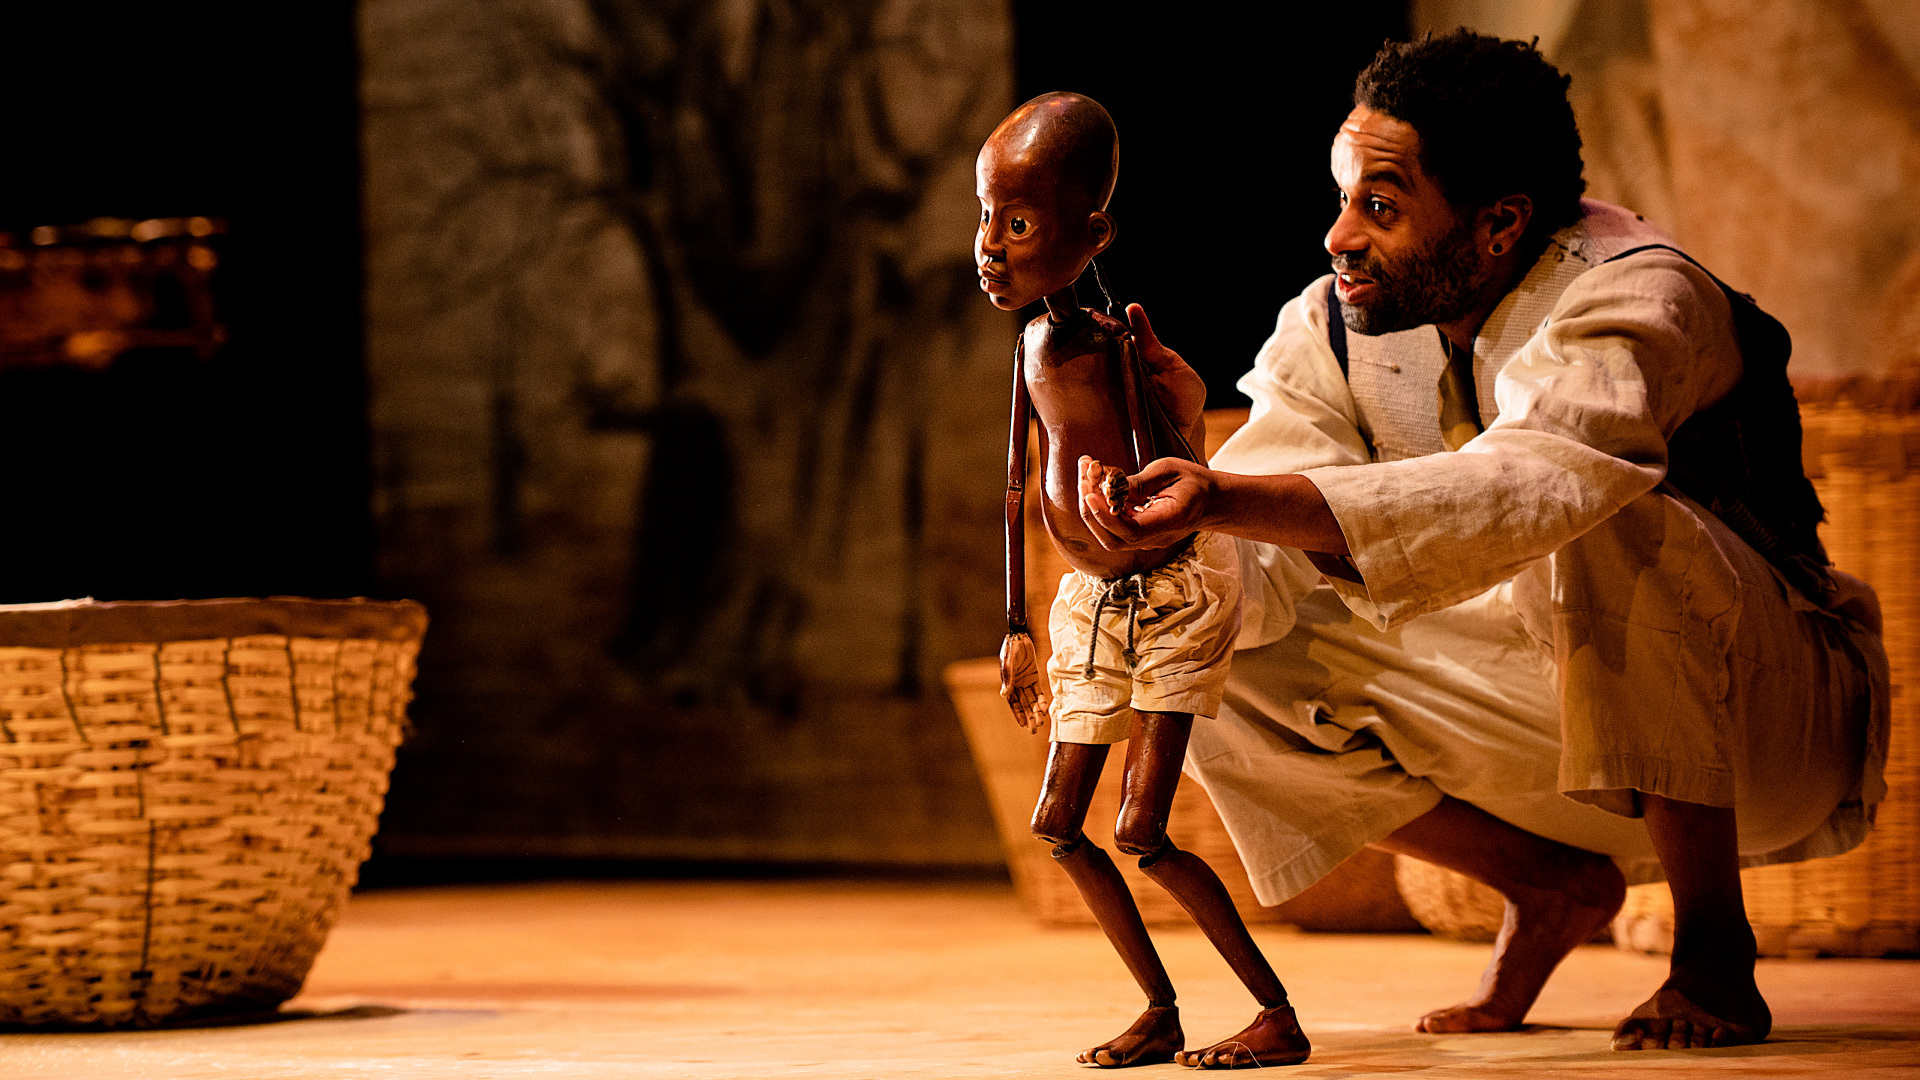 A crouching man operates a puppet of a small boy.